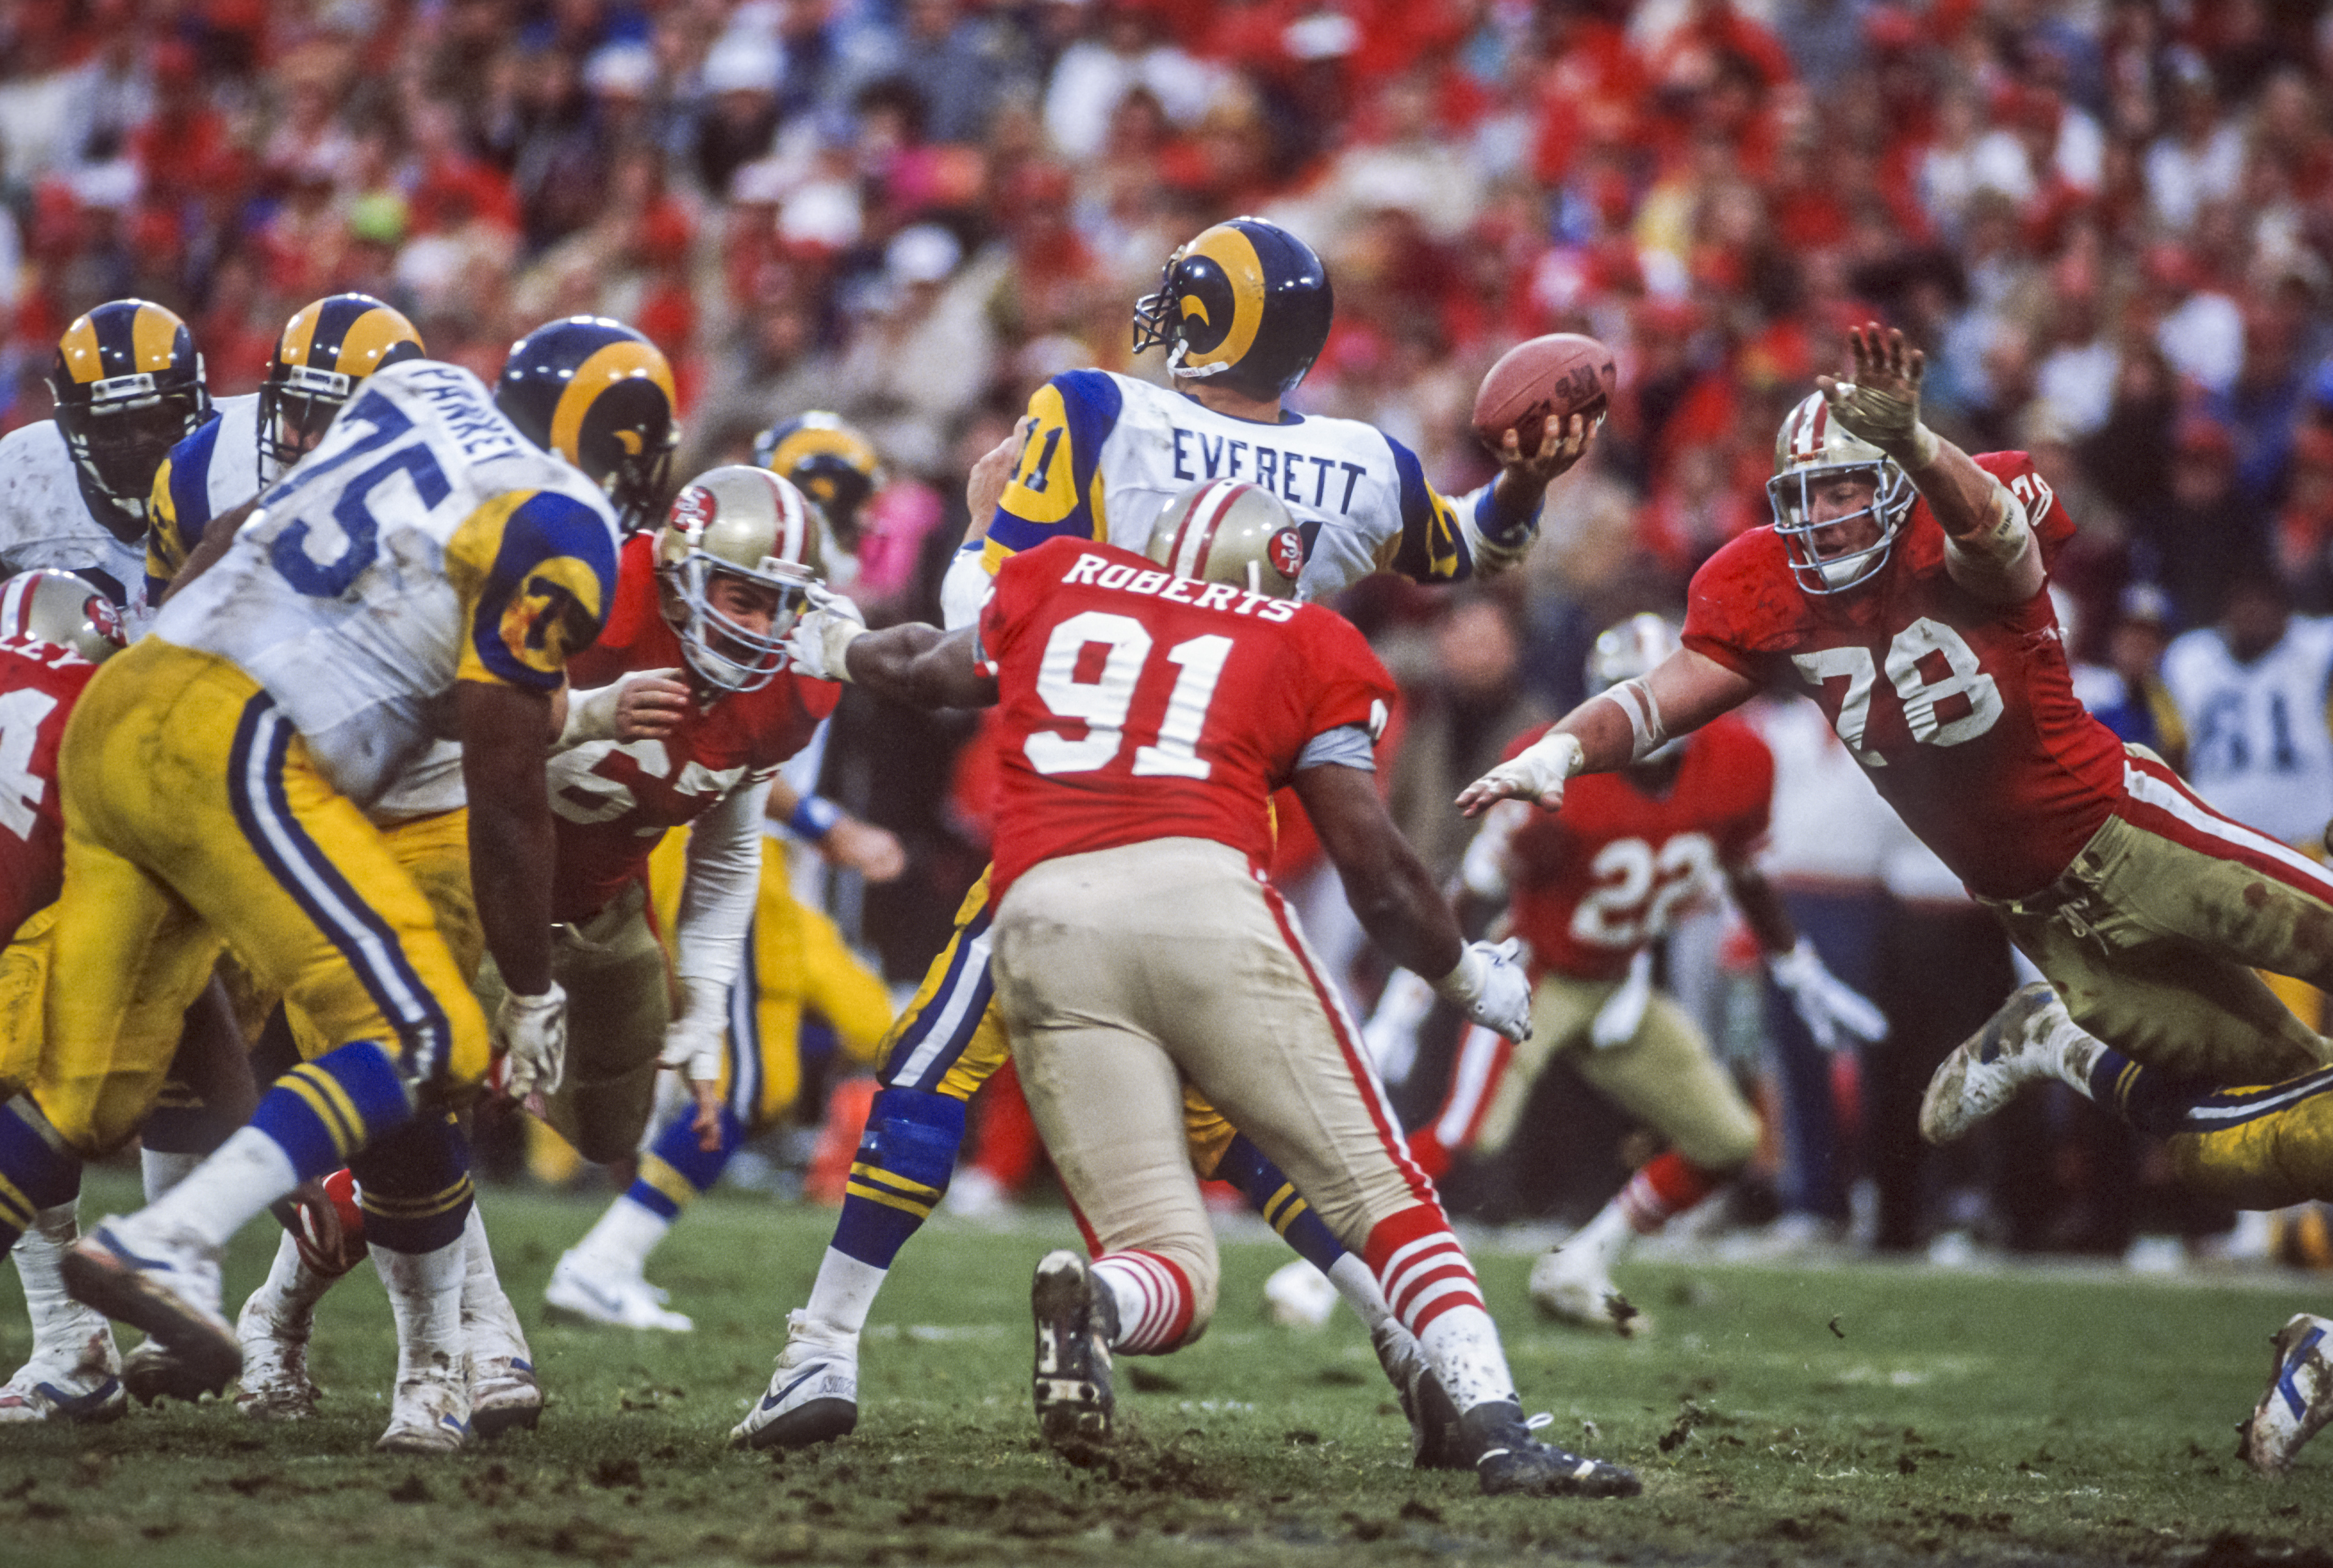 Jim Everett was pressured all day by the 49ers in the 1989 NFC Championship Game